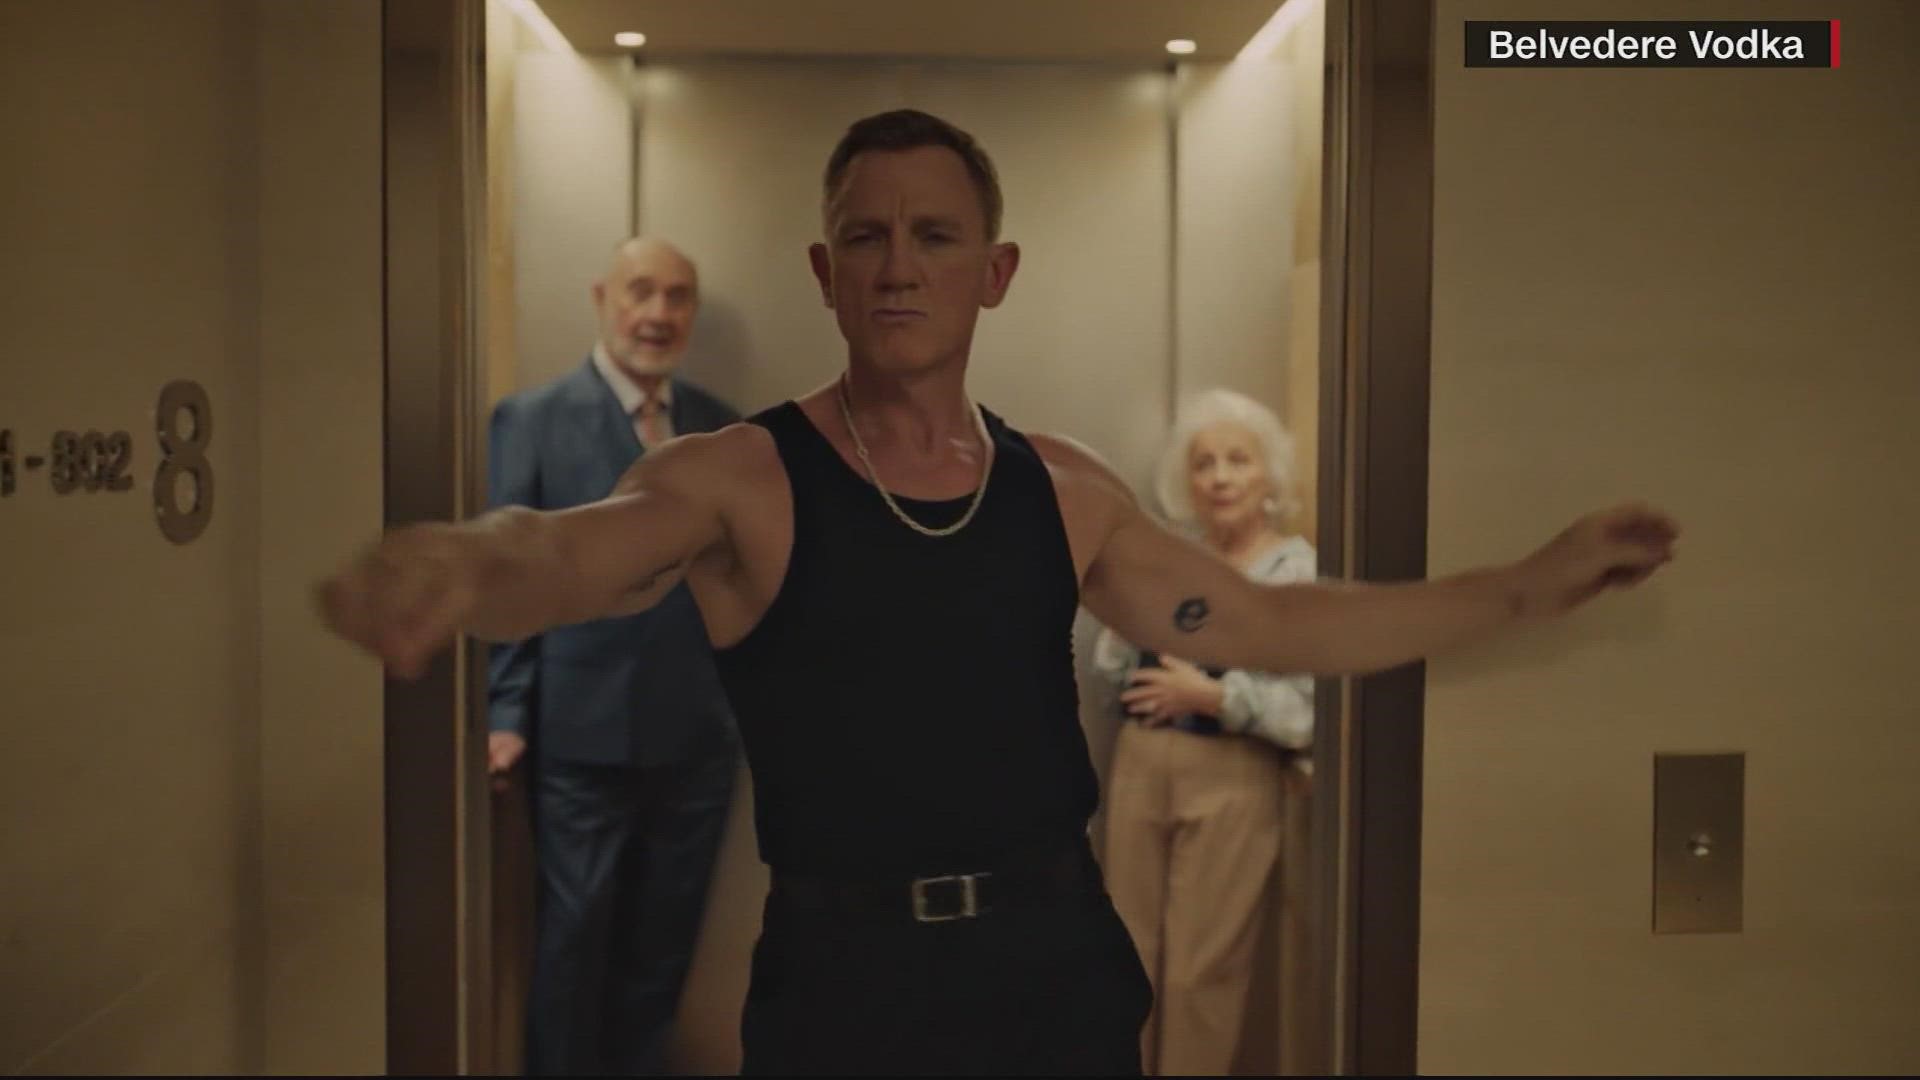 Daniel Craig shows off some killer dance moves in a new commercial for Belvedere directed by Taika Waititi.